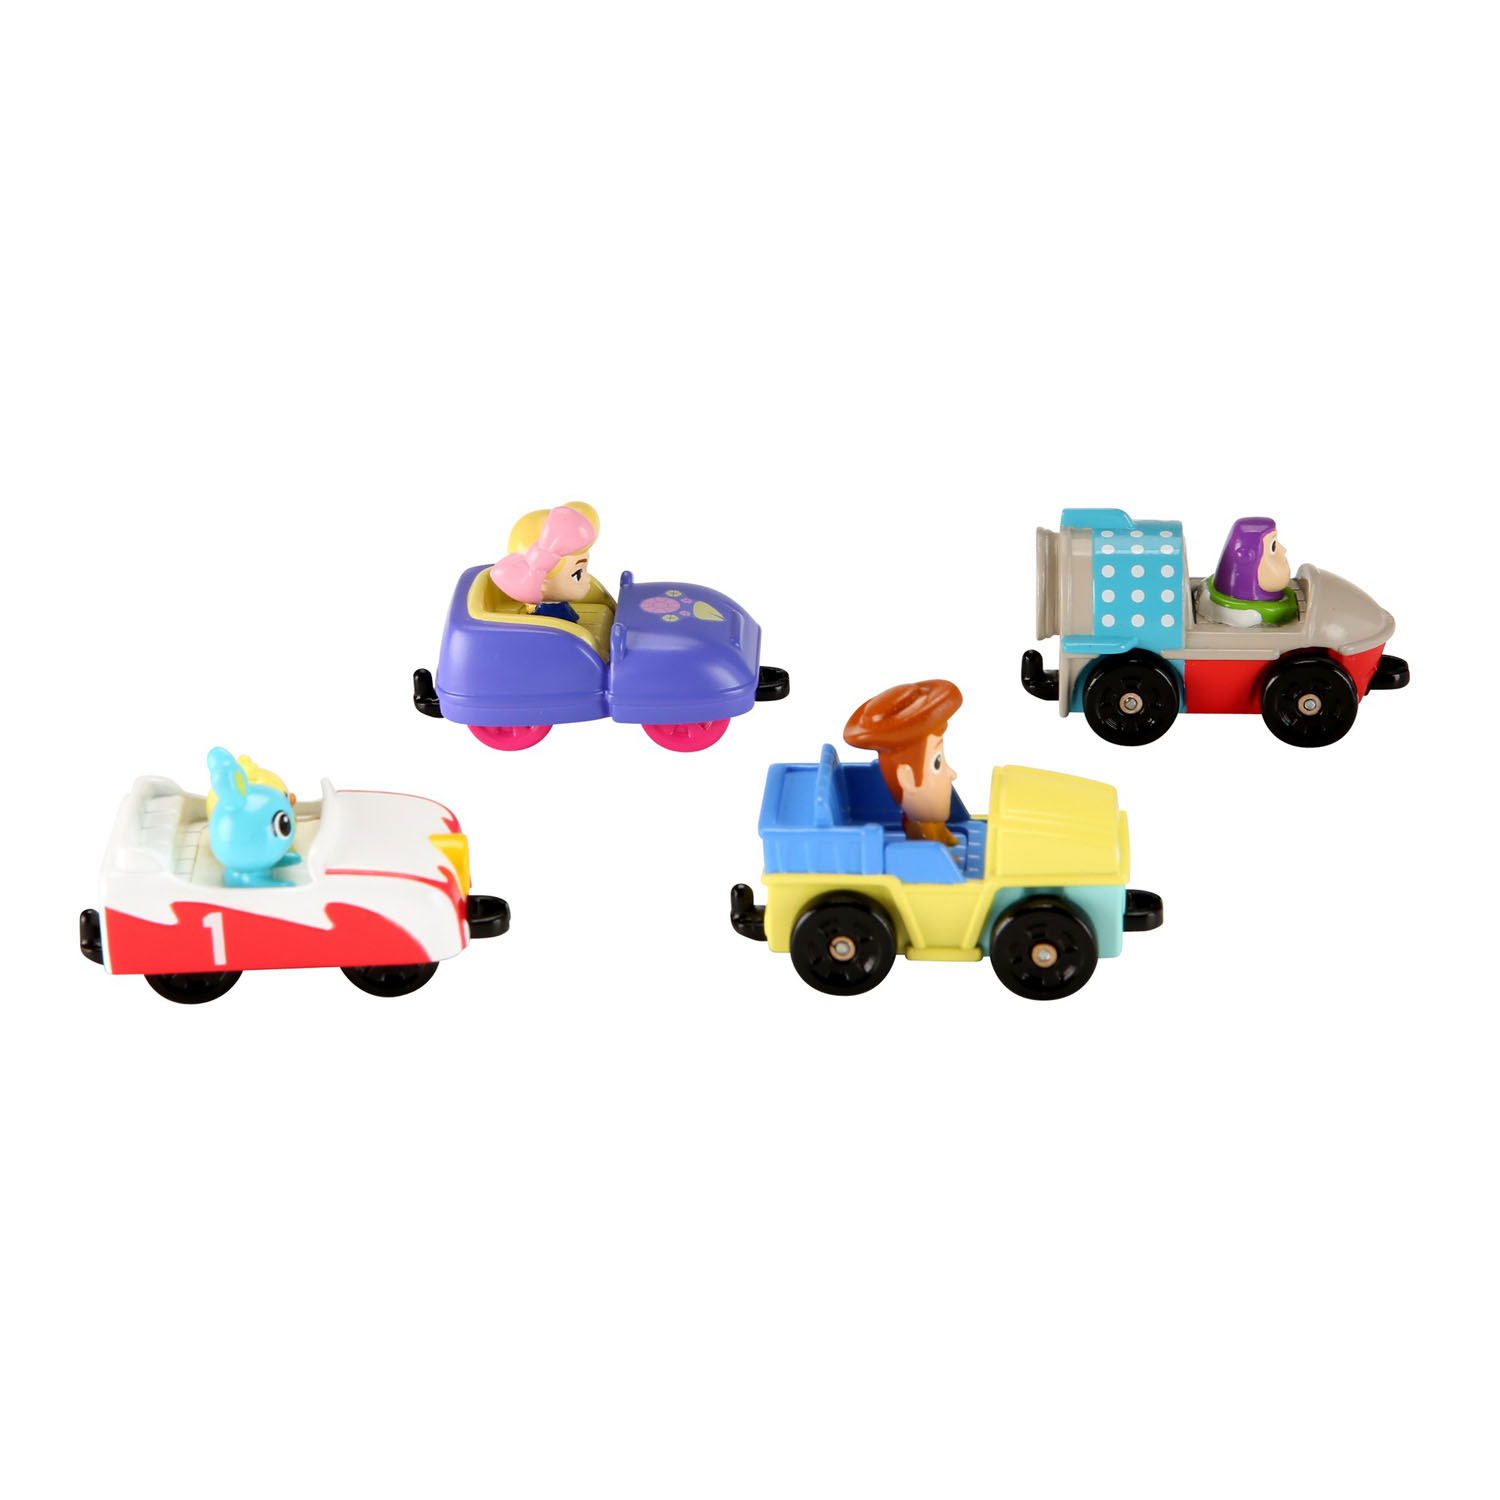 Fisher Price Toy Story 4 - Carnival Cruisers